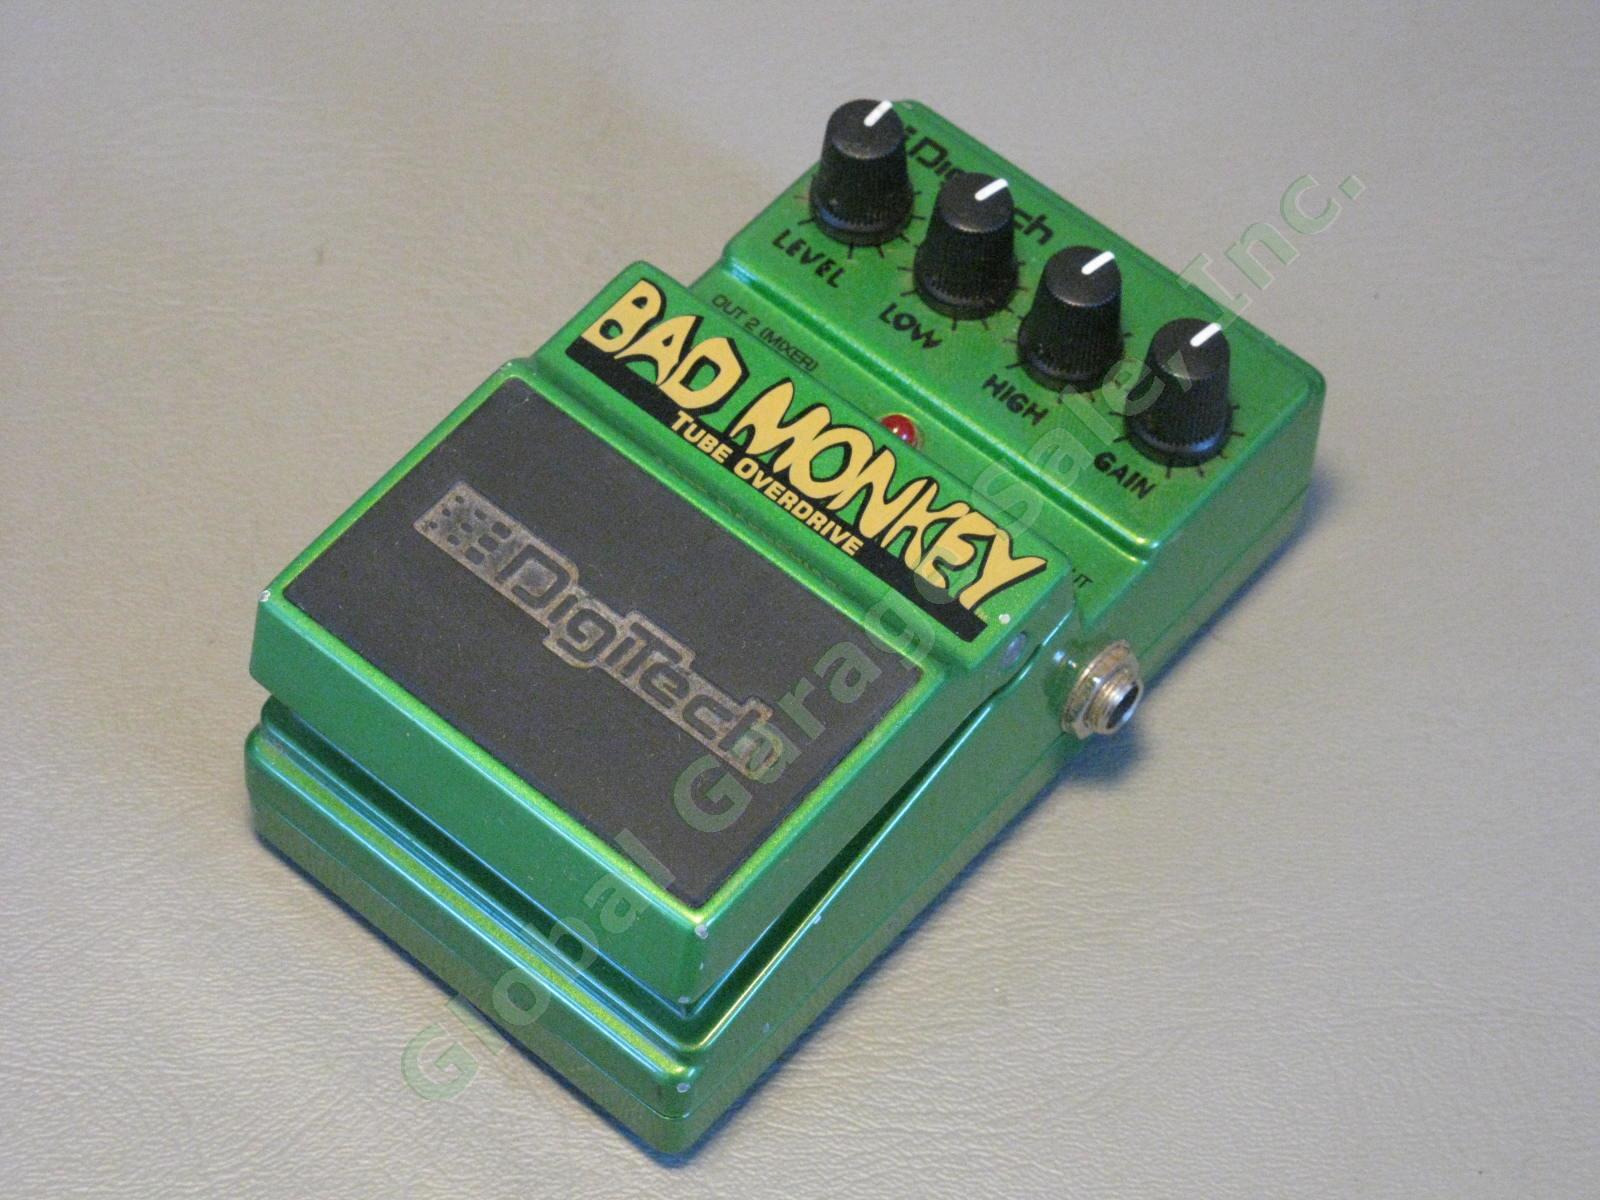 DigiTech Bad Monkey Tube Overdrive Distortion Guitar Effects Pedal Exc Cond!